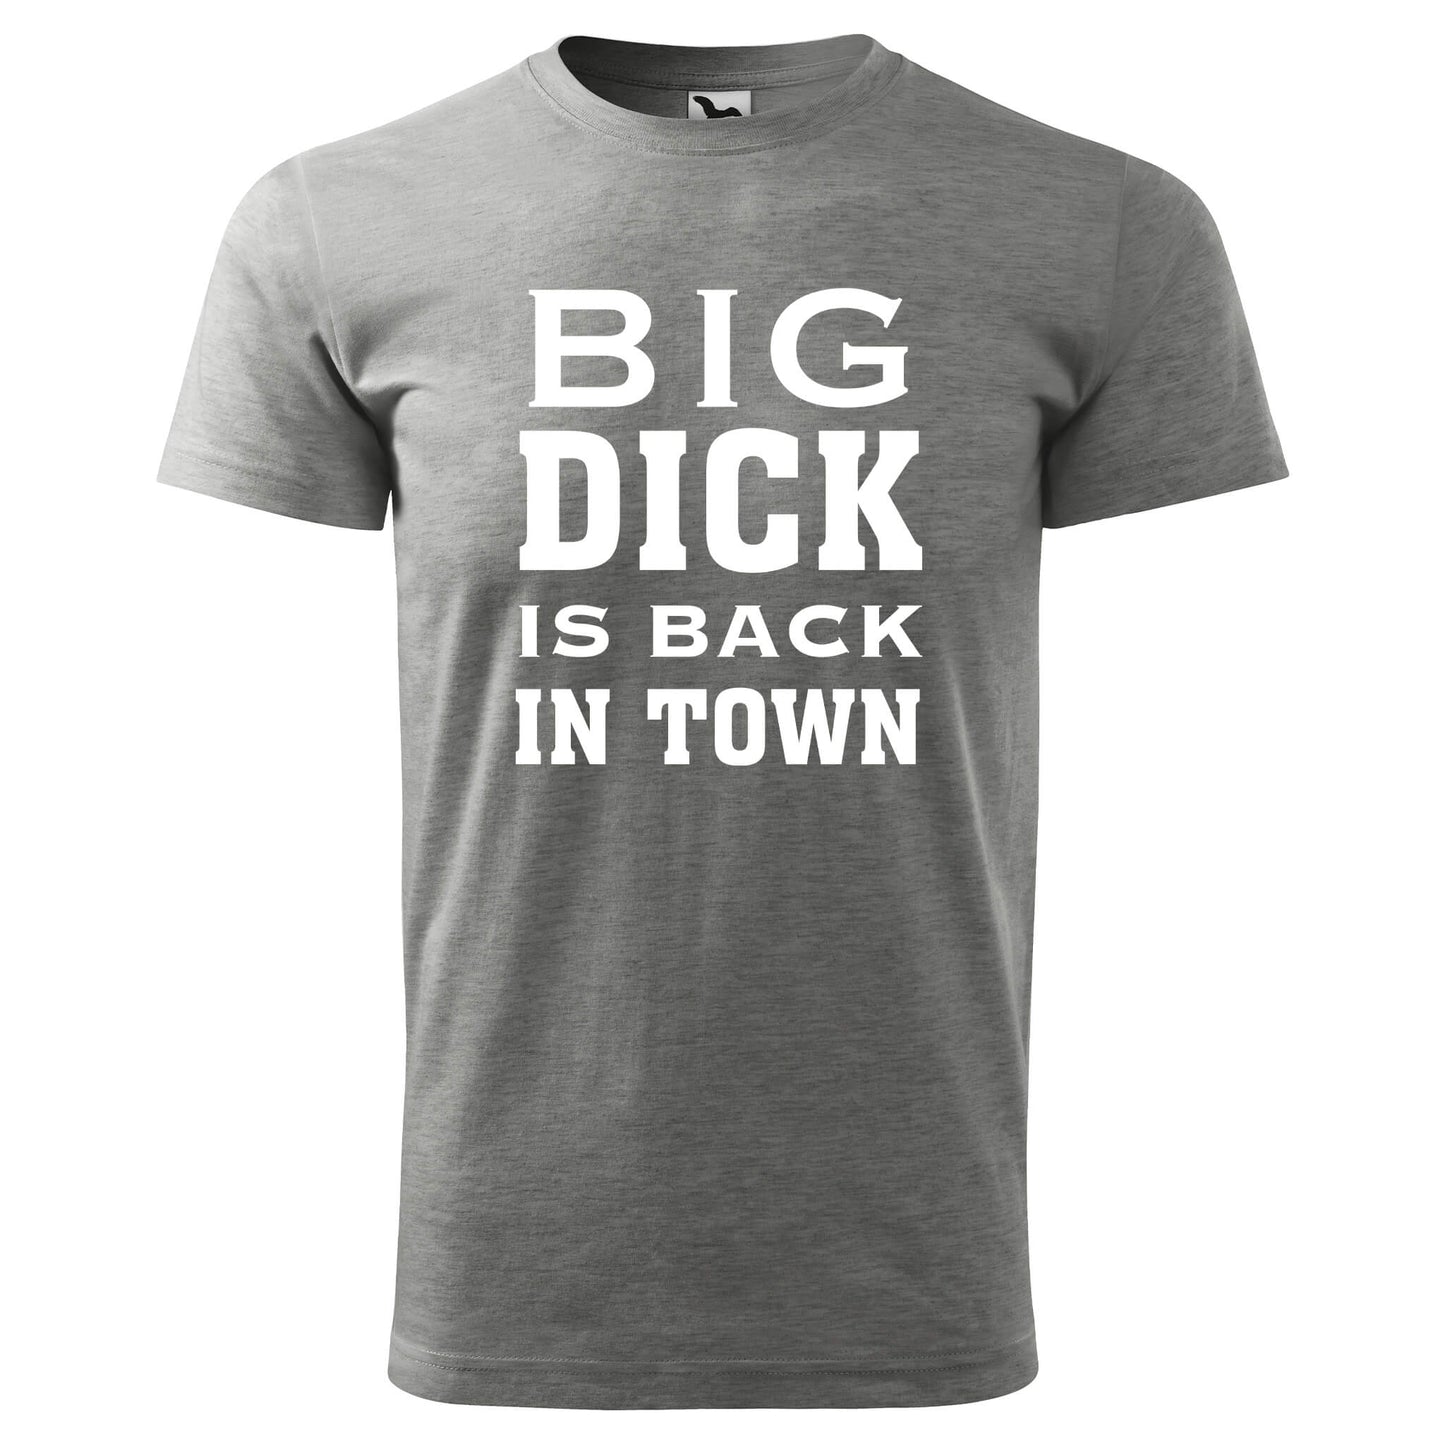 T-shirt - Big dick is back in town